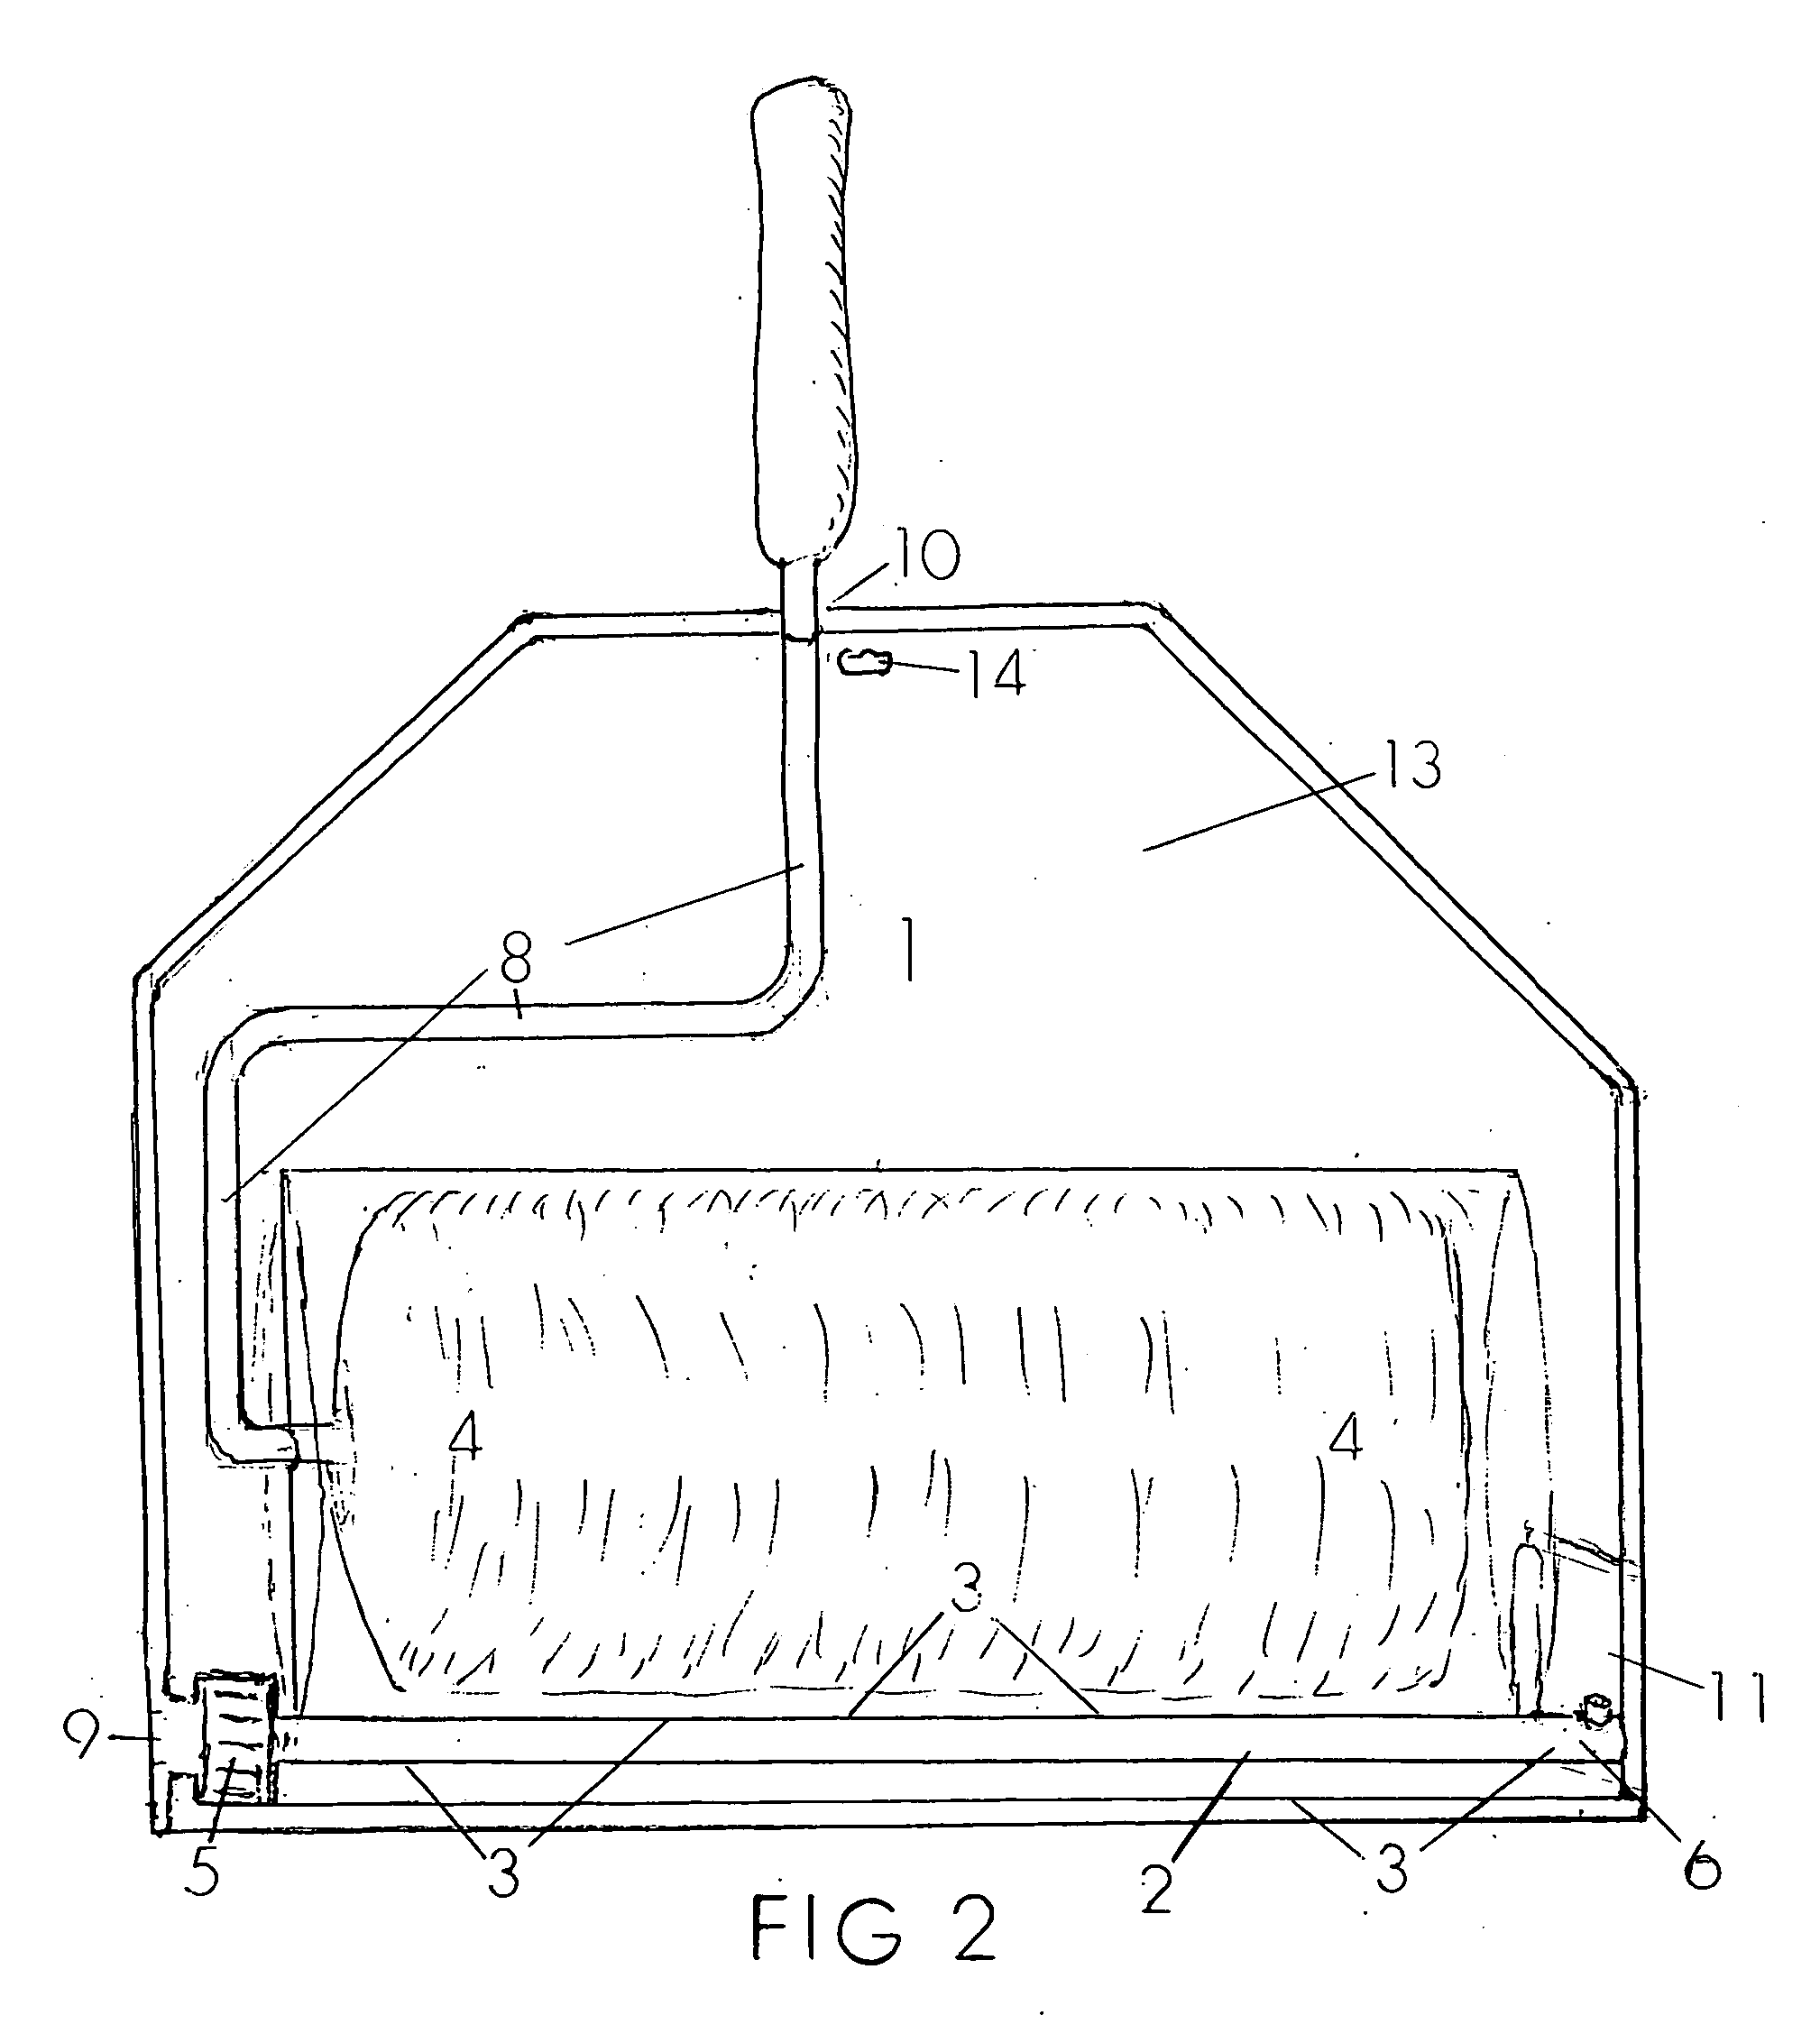 Transparent combination package for cleaning, spin drying, displaying and storing a paint roller